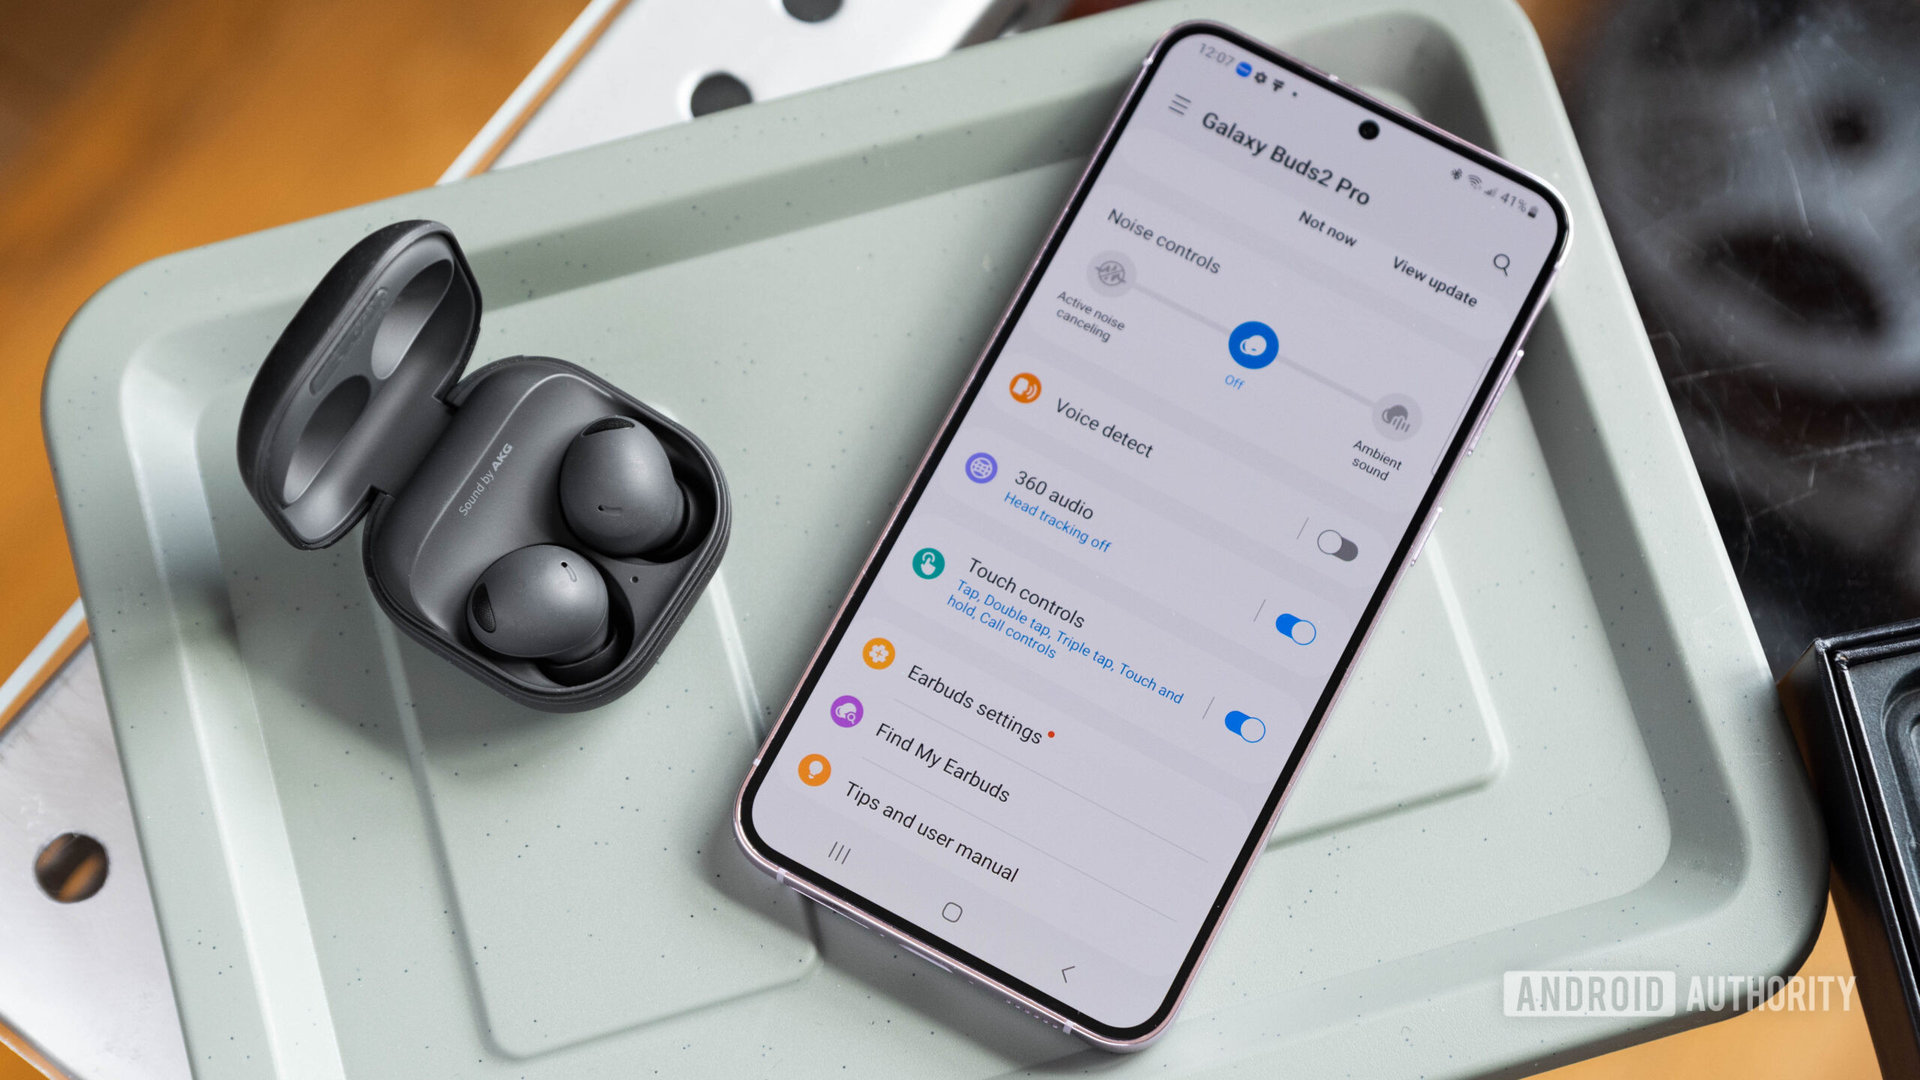 The samsung galaxy buds 2 pro earbuds and case open next to a samsung galaxy buds 23 plus.